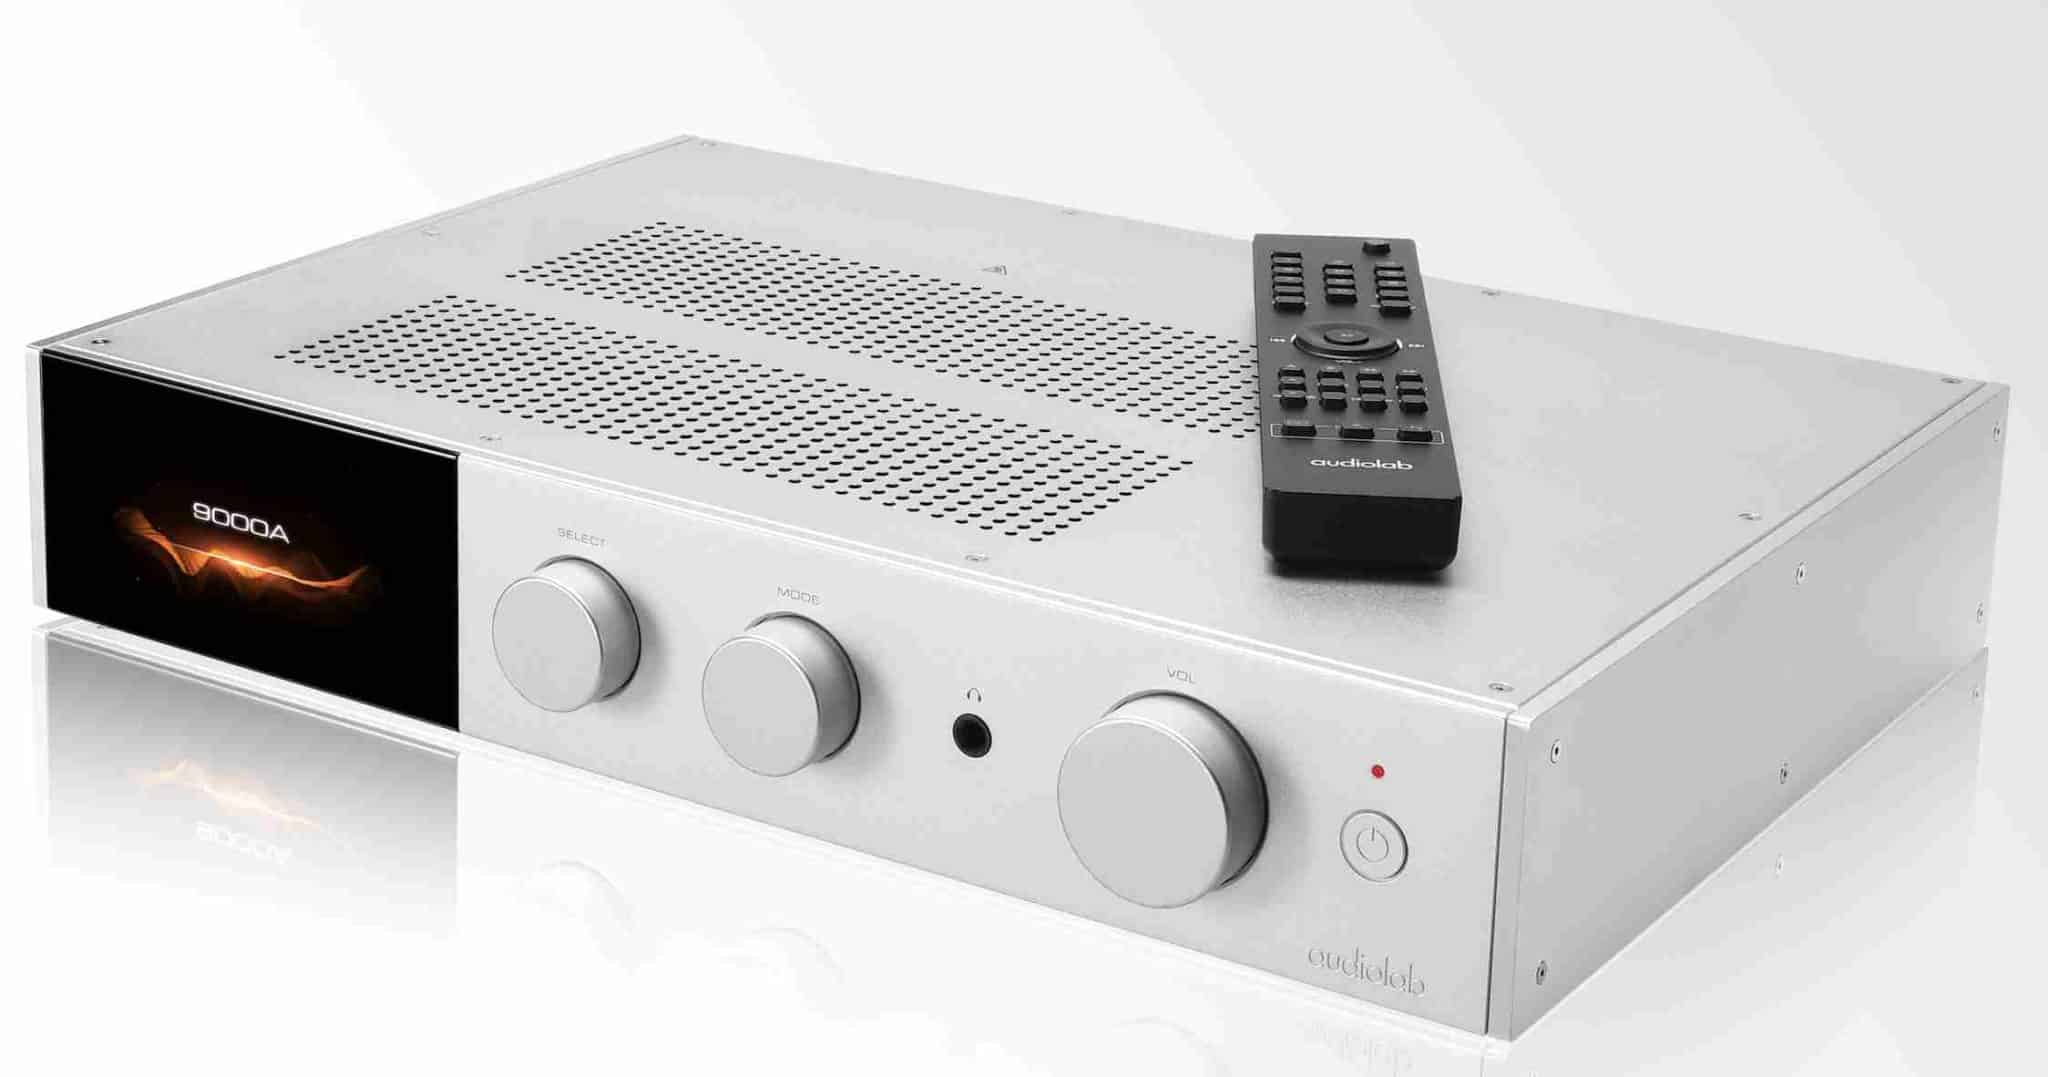 9000A AMPLIFIER FROM AUDIOLAB